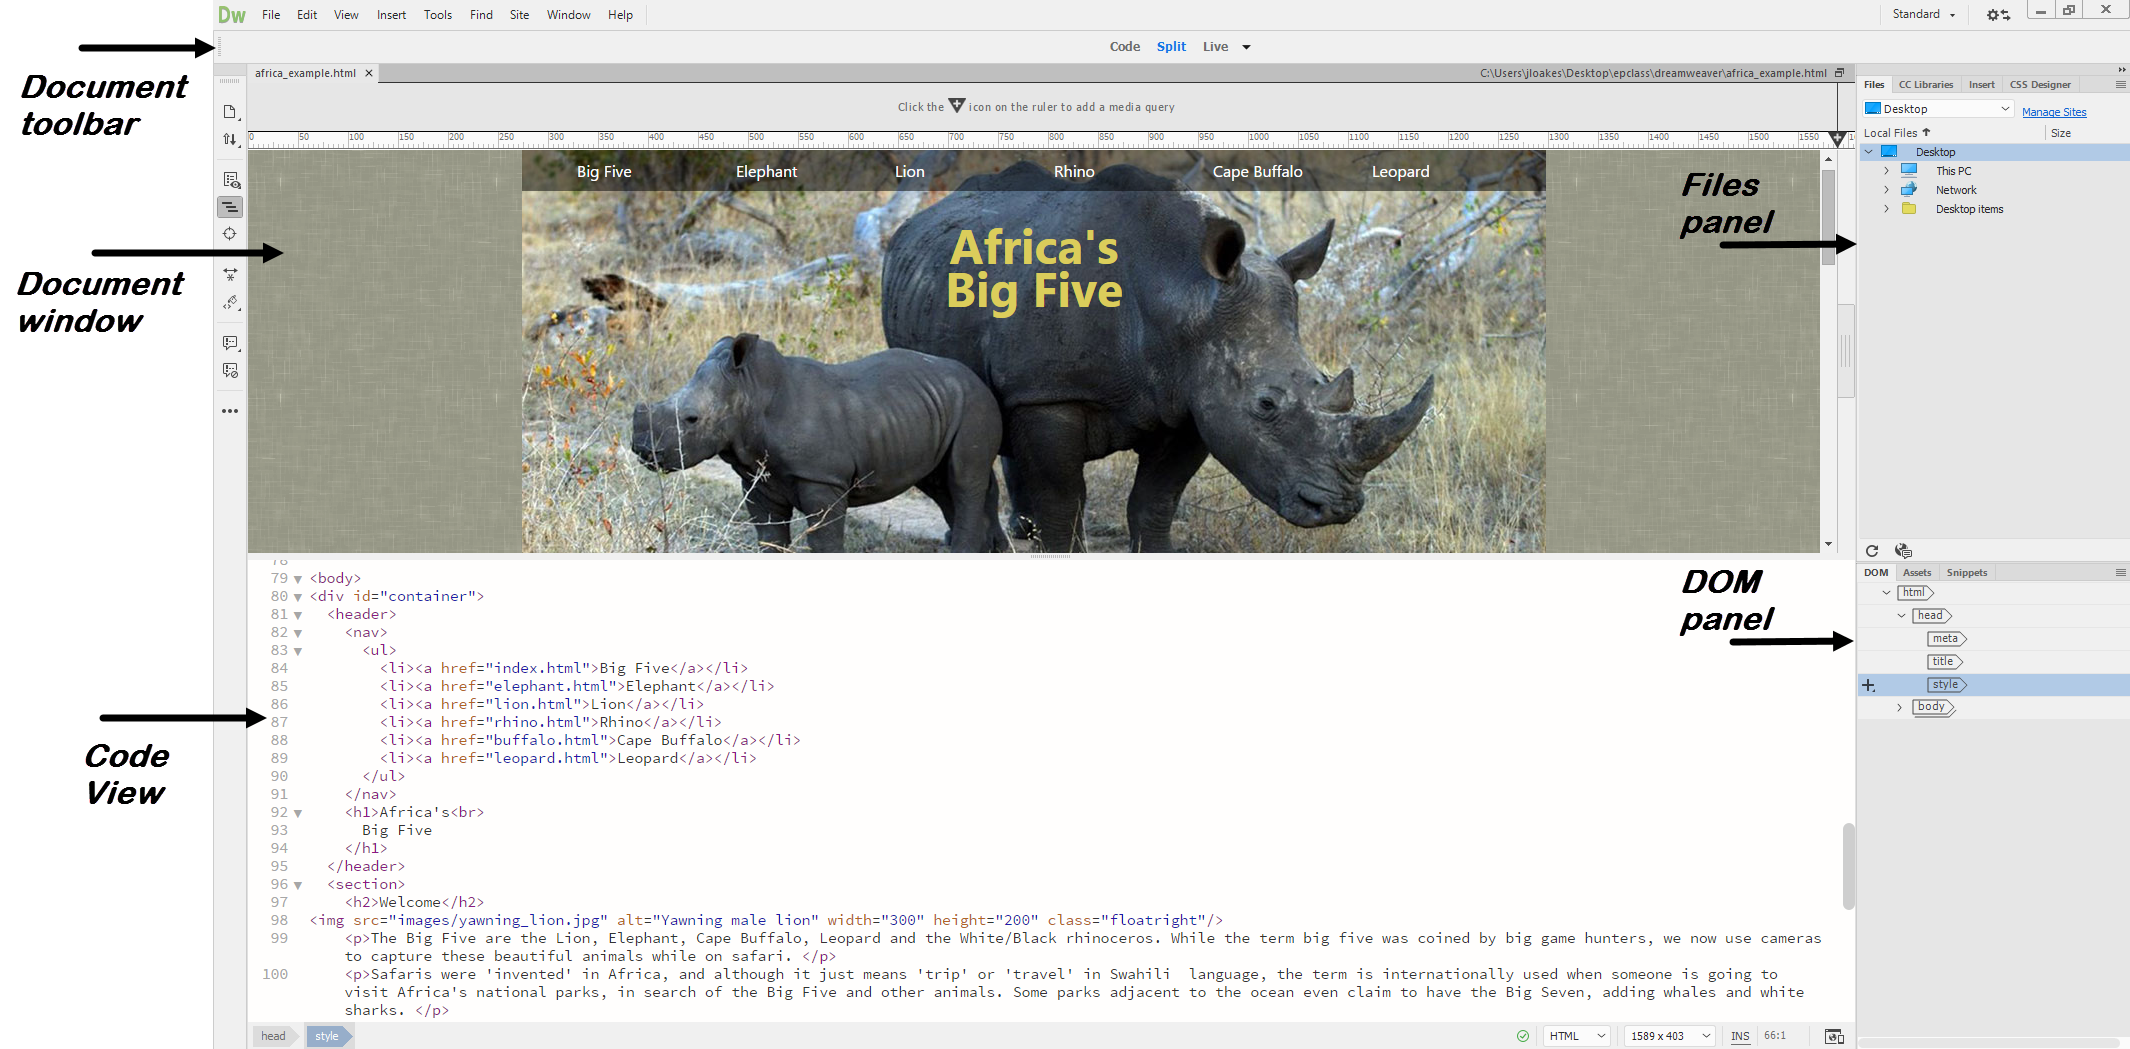 Screen shot of Dreamweaver interface using Standard workspace with africa_example.html open. The Document toolbar is at the top of the screen.The Document window is below the toolbar. Code view is below the Document window. To the right are the Files and DOM panels.